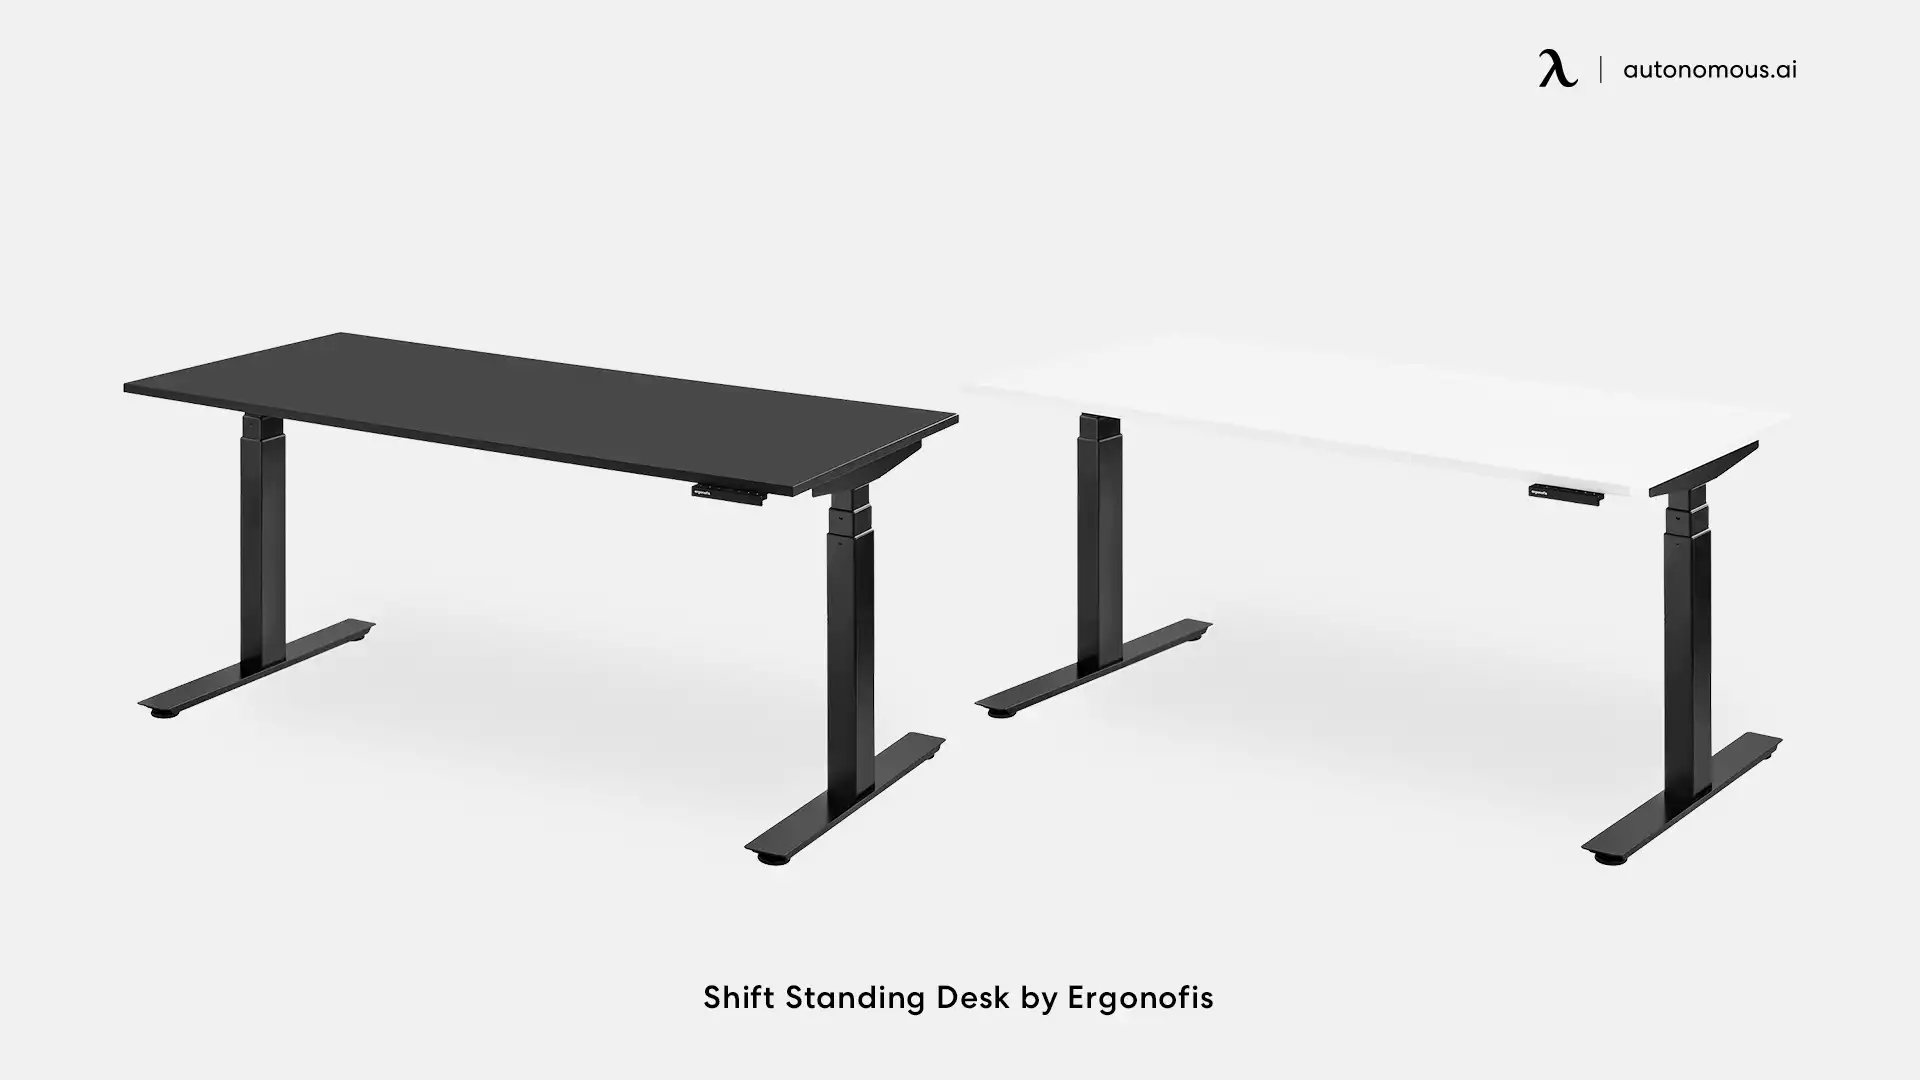 Shift standing desk canada by Ergonofis